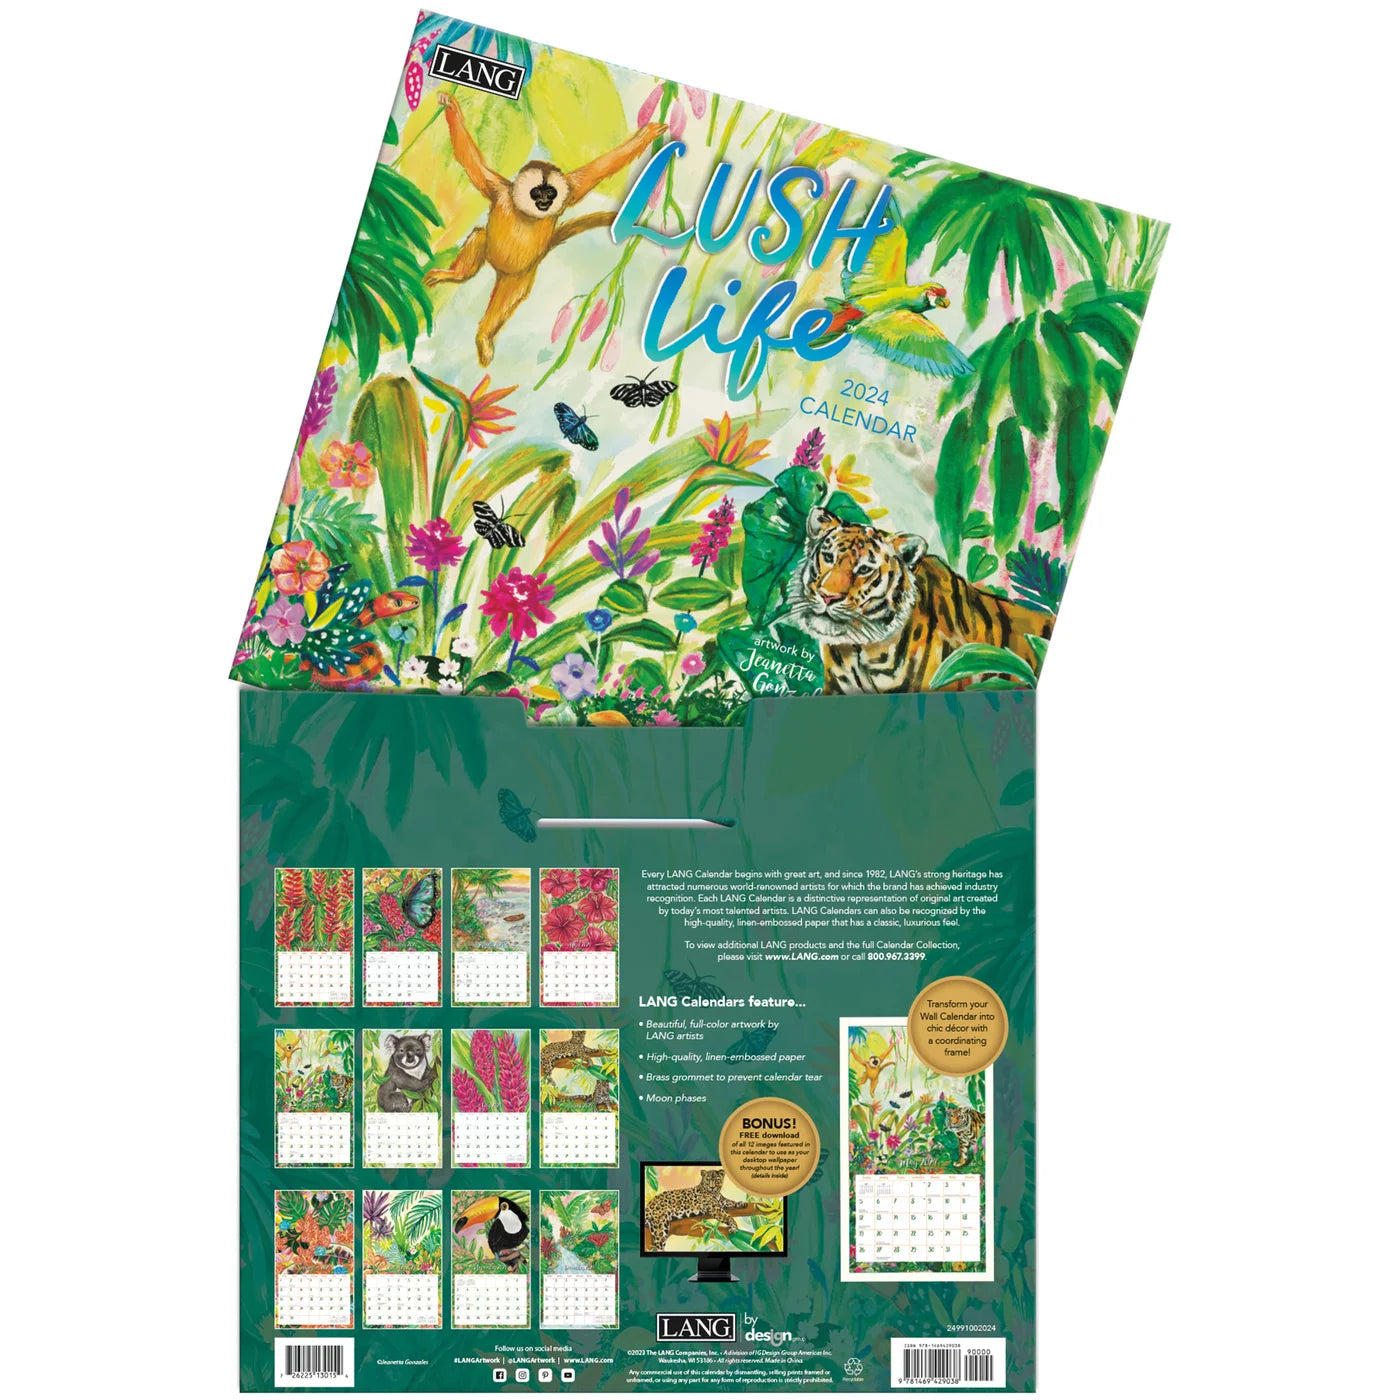 2024 LANG Lush Life By Jeanetta Gonzales - Deluxe Wall Calendar